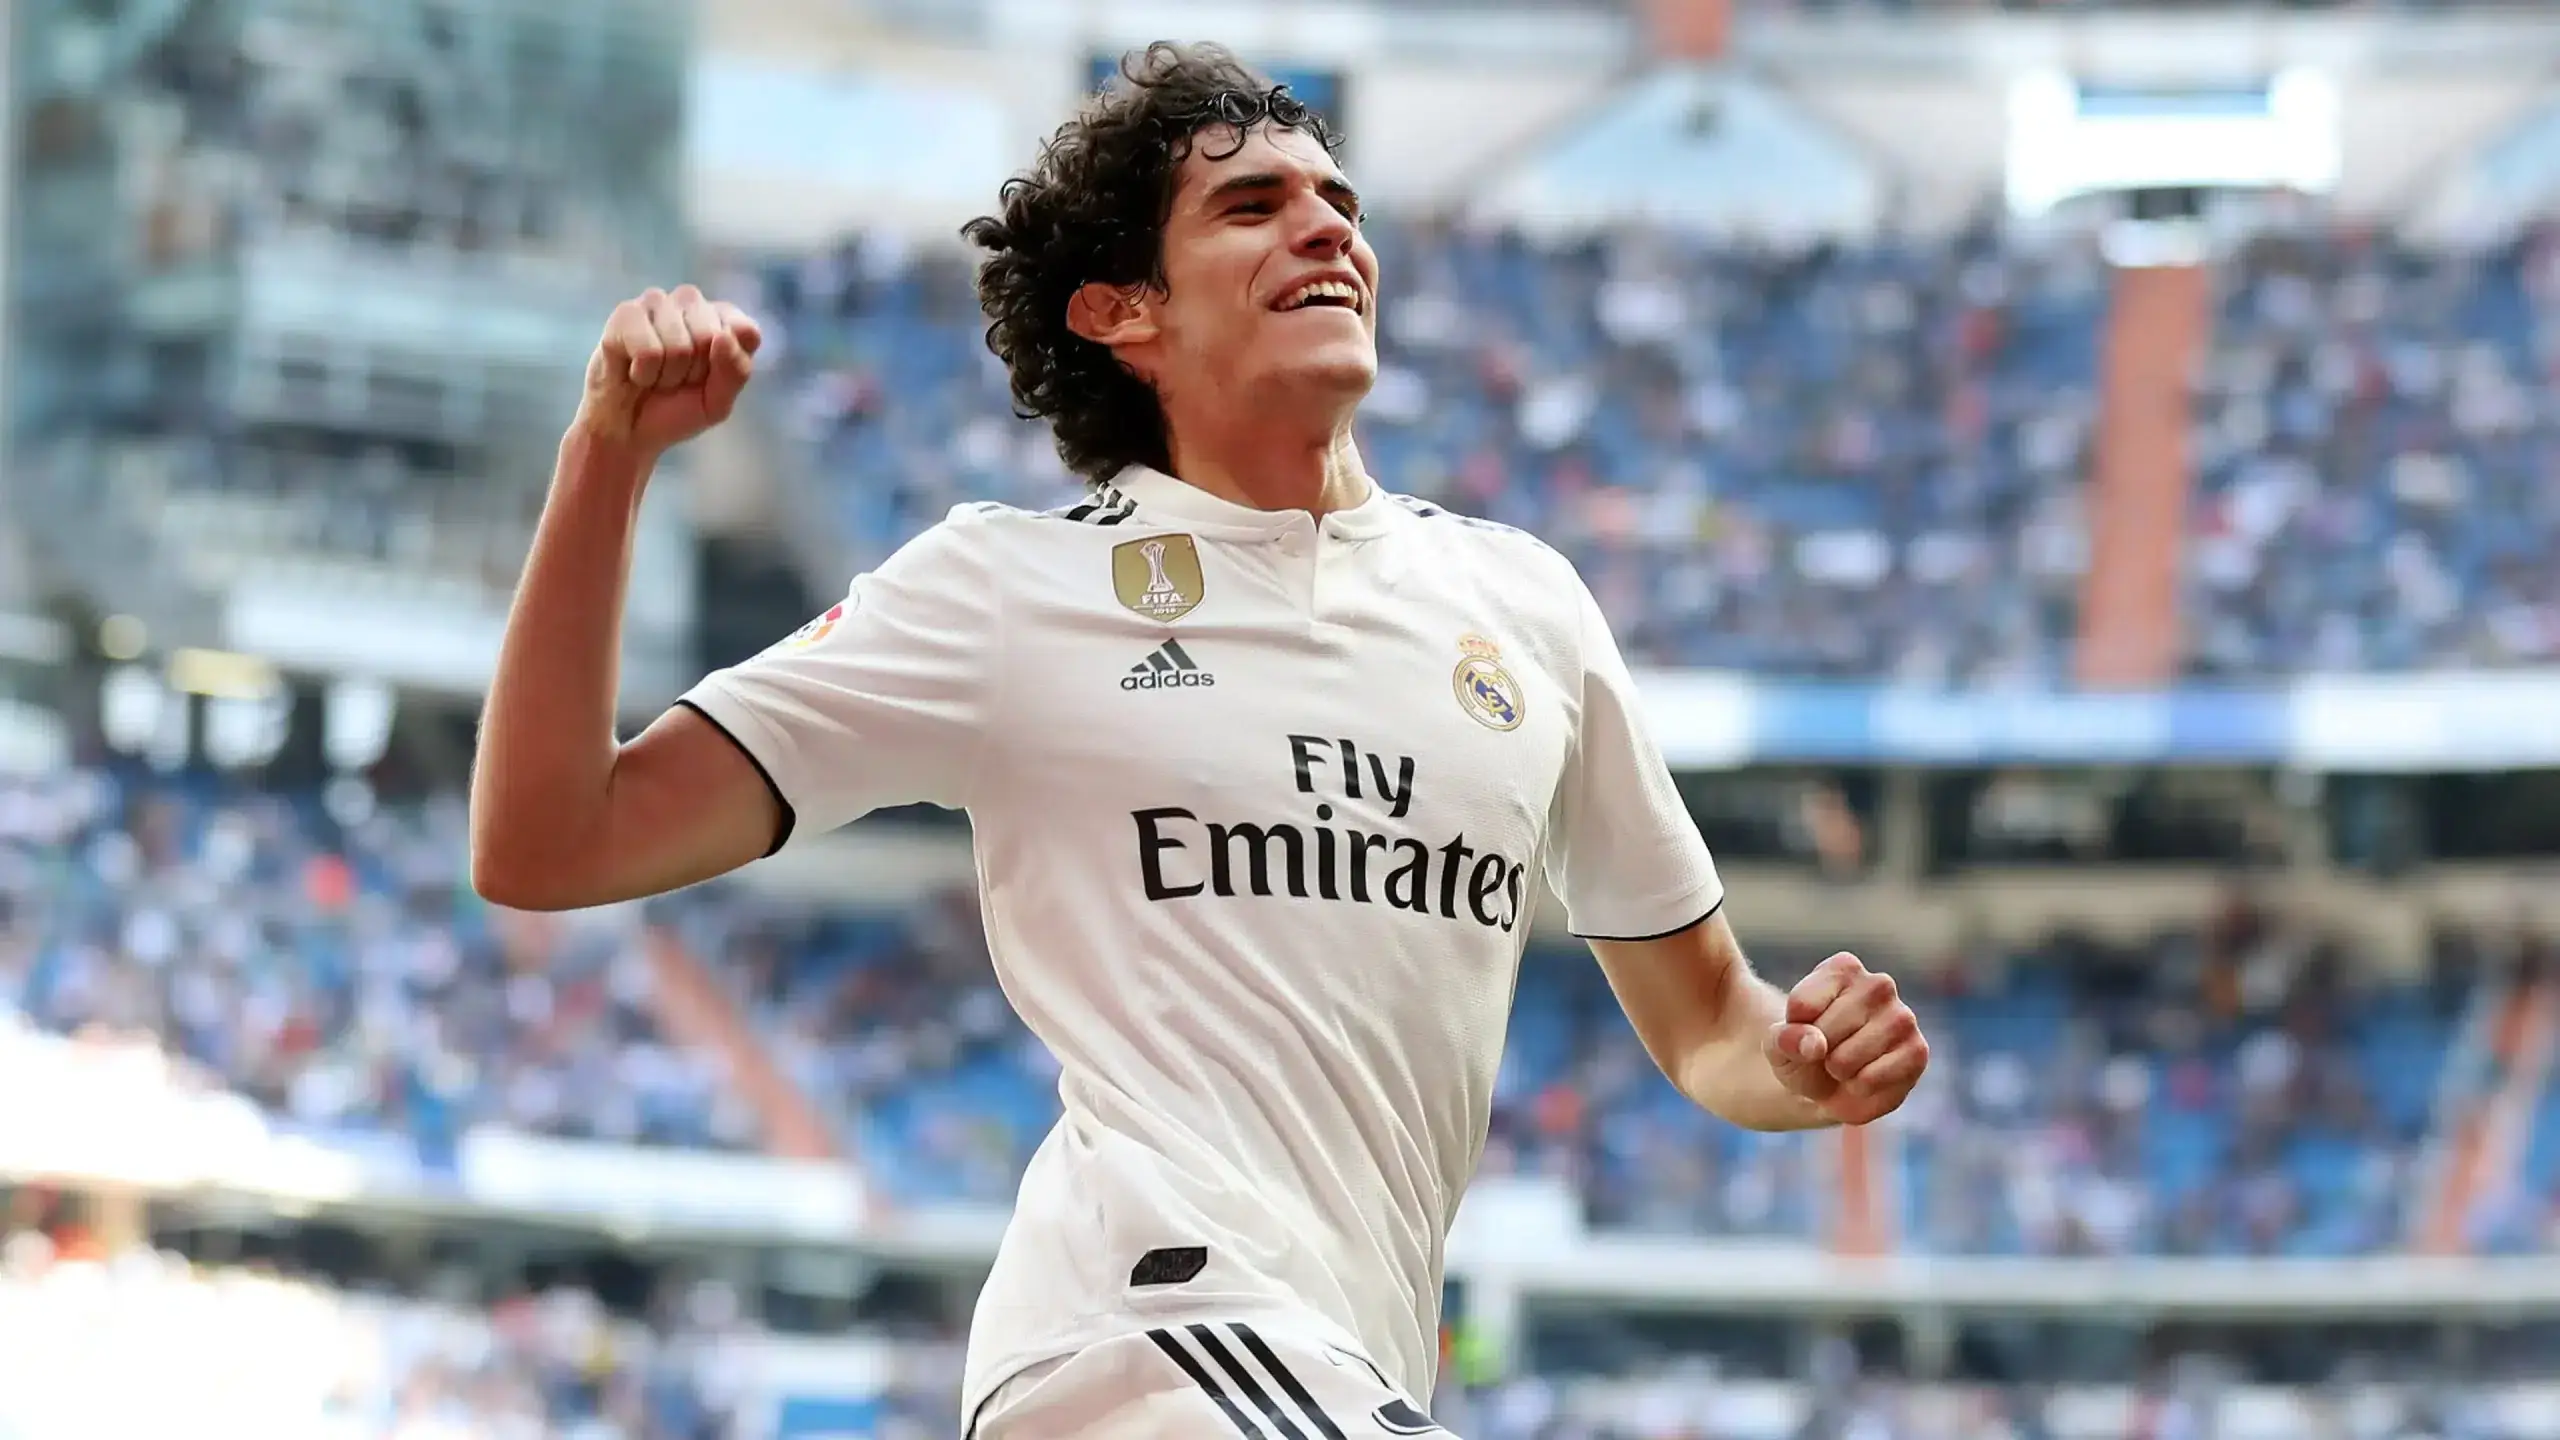 Jesús Vallejo willing to do anything to return to Real Zaragoza
	
